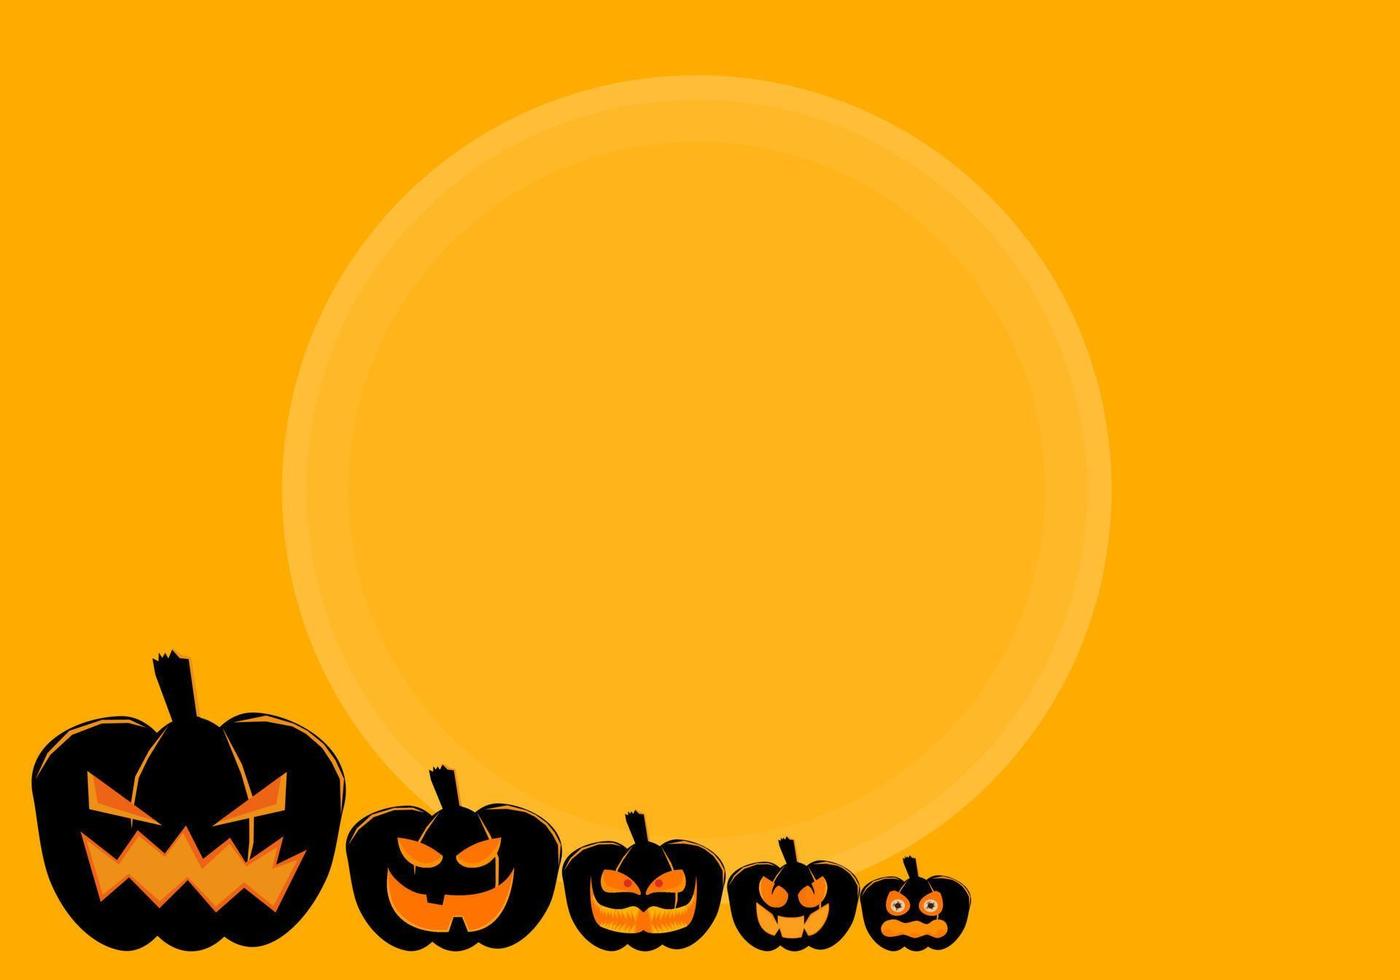 Orange blank paper background with scary and fun ghost and bats, with copy space for Halloween design, vector illustration.